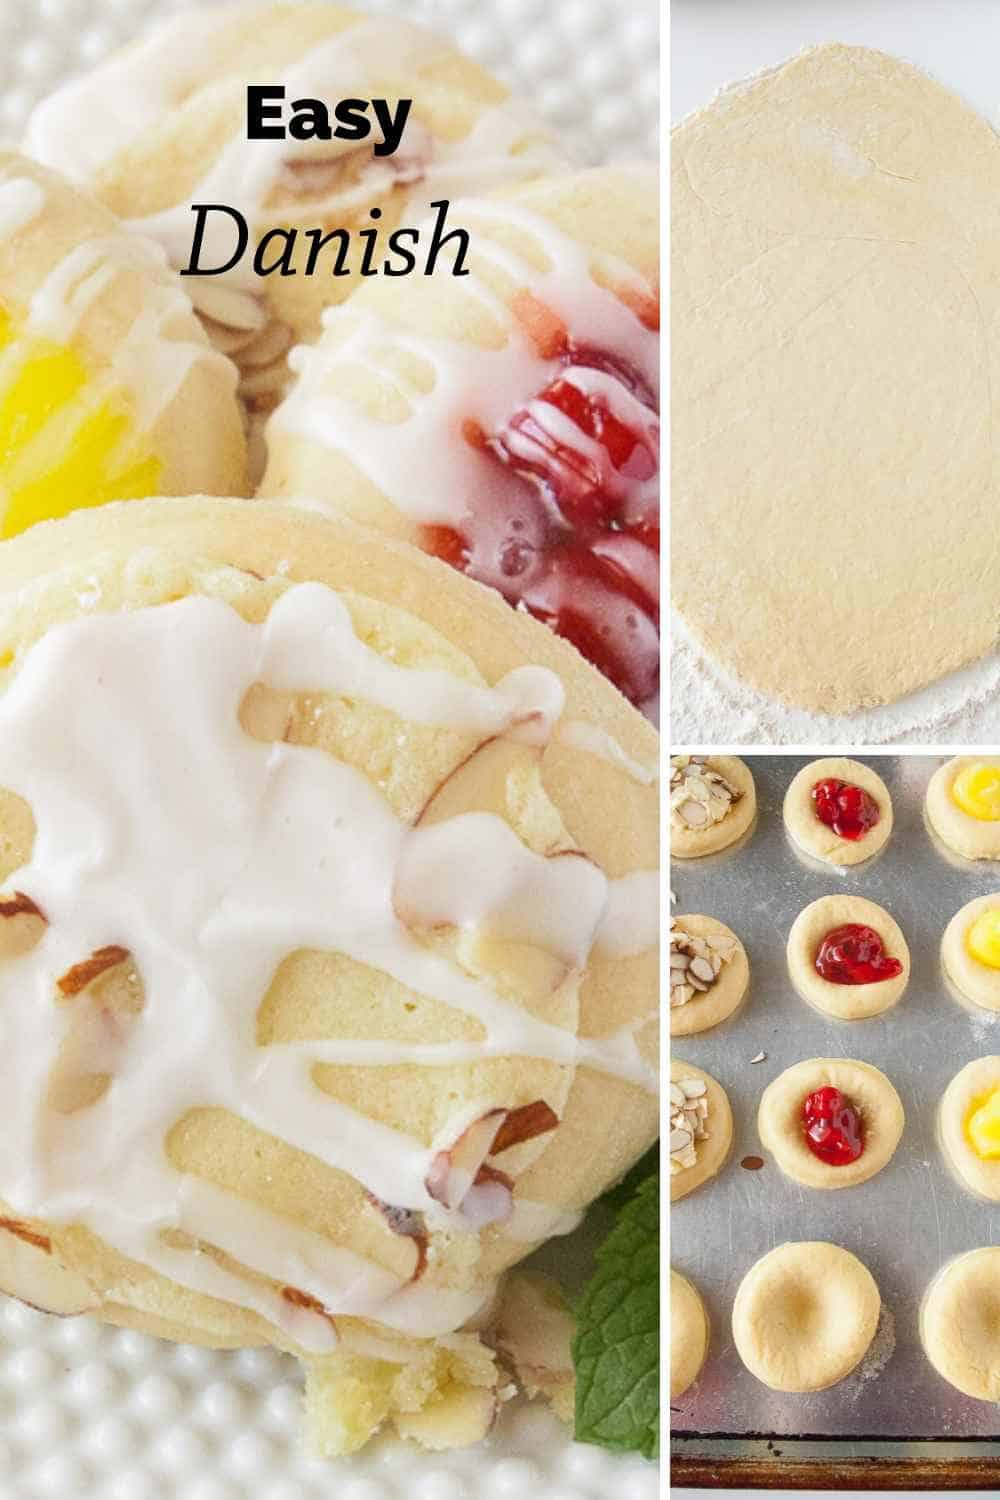 Easy Danish Recipe - Mindee's Cooking Obsession